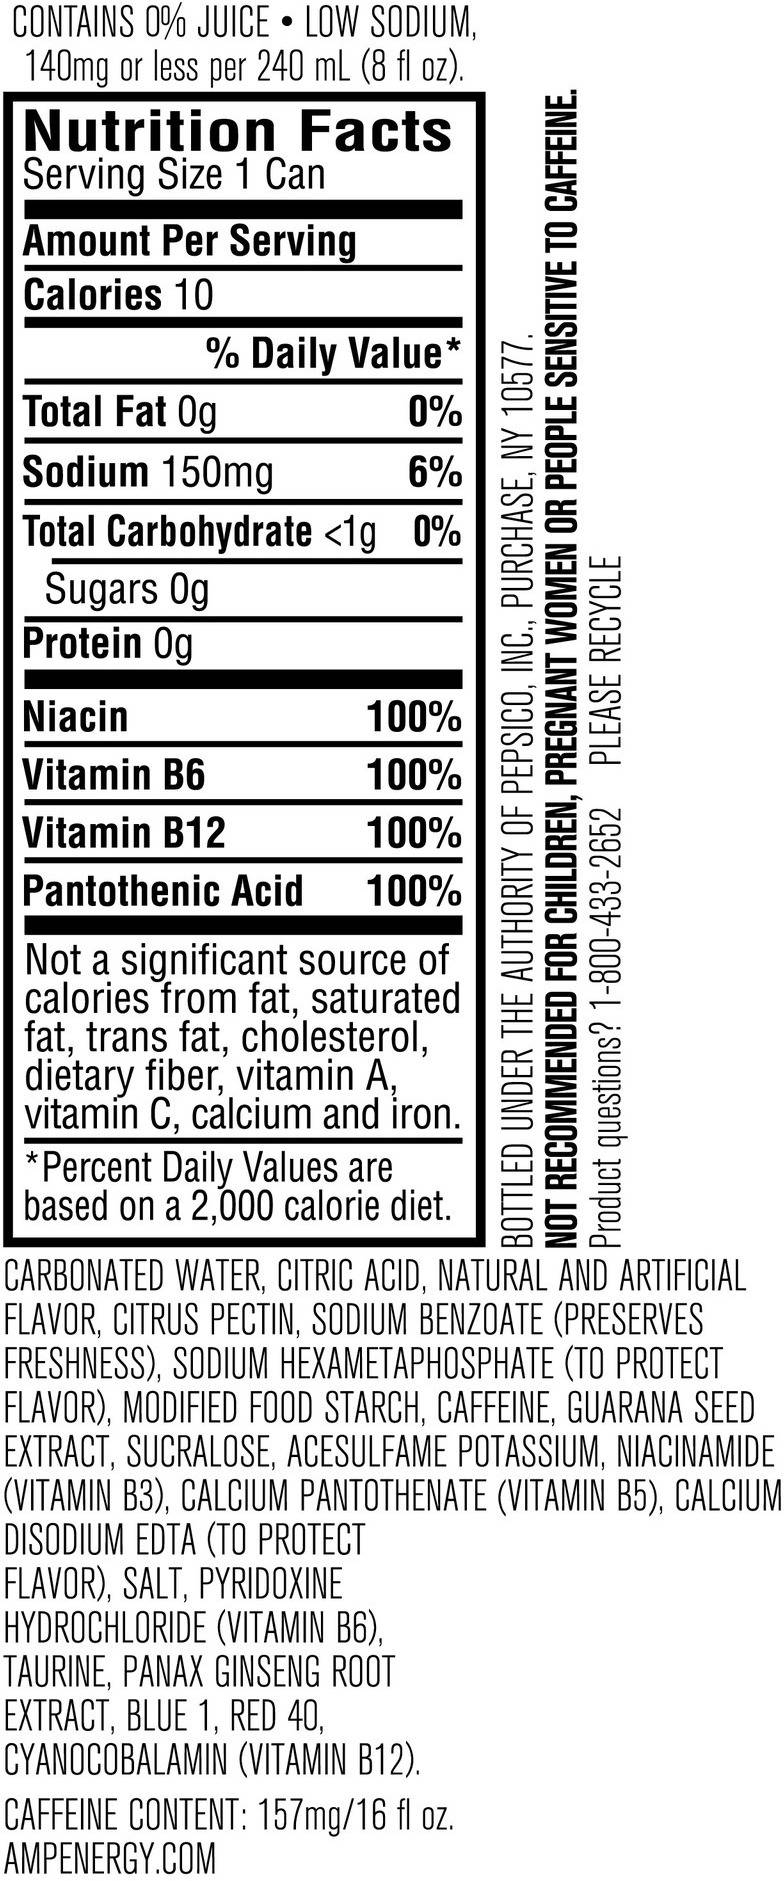 Image describing nutrition information for product AMP Energy Zero Blueberry White Grape